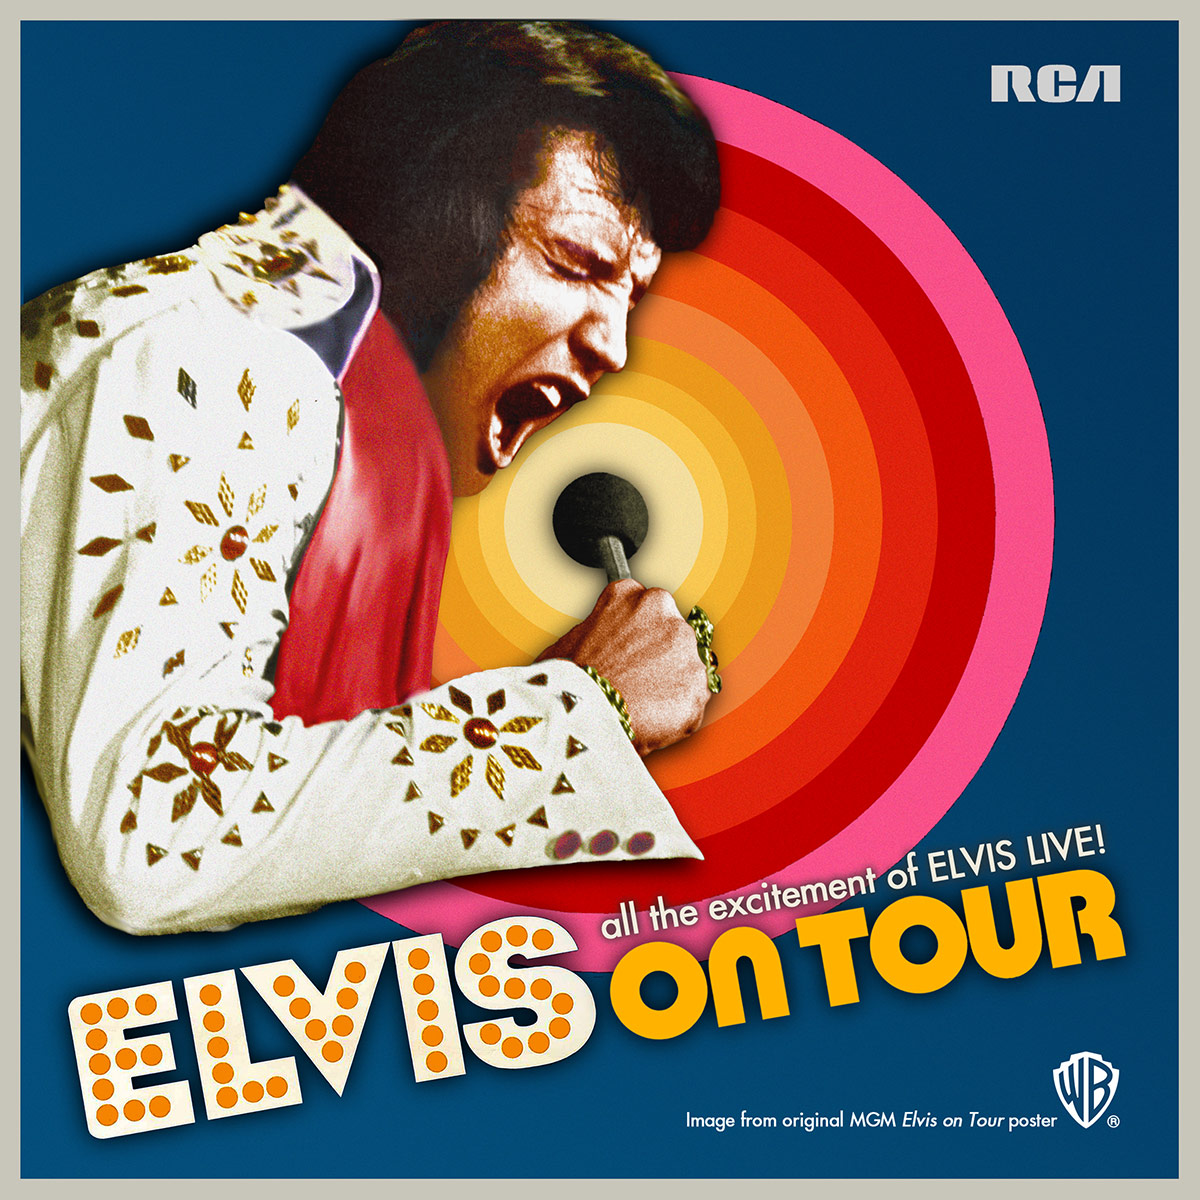 &#8216;Elvis On Tour&#8217; Box Set With Unreleased Live &#038; Studio Material Coming December 2